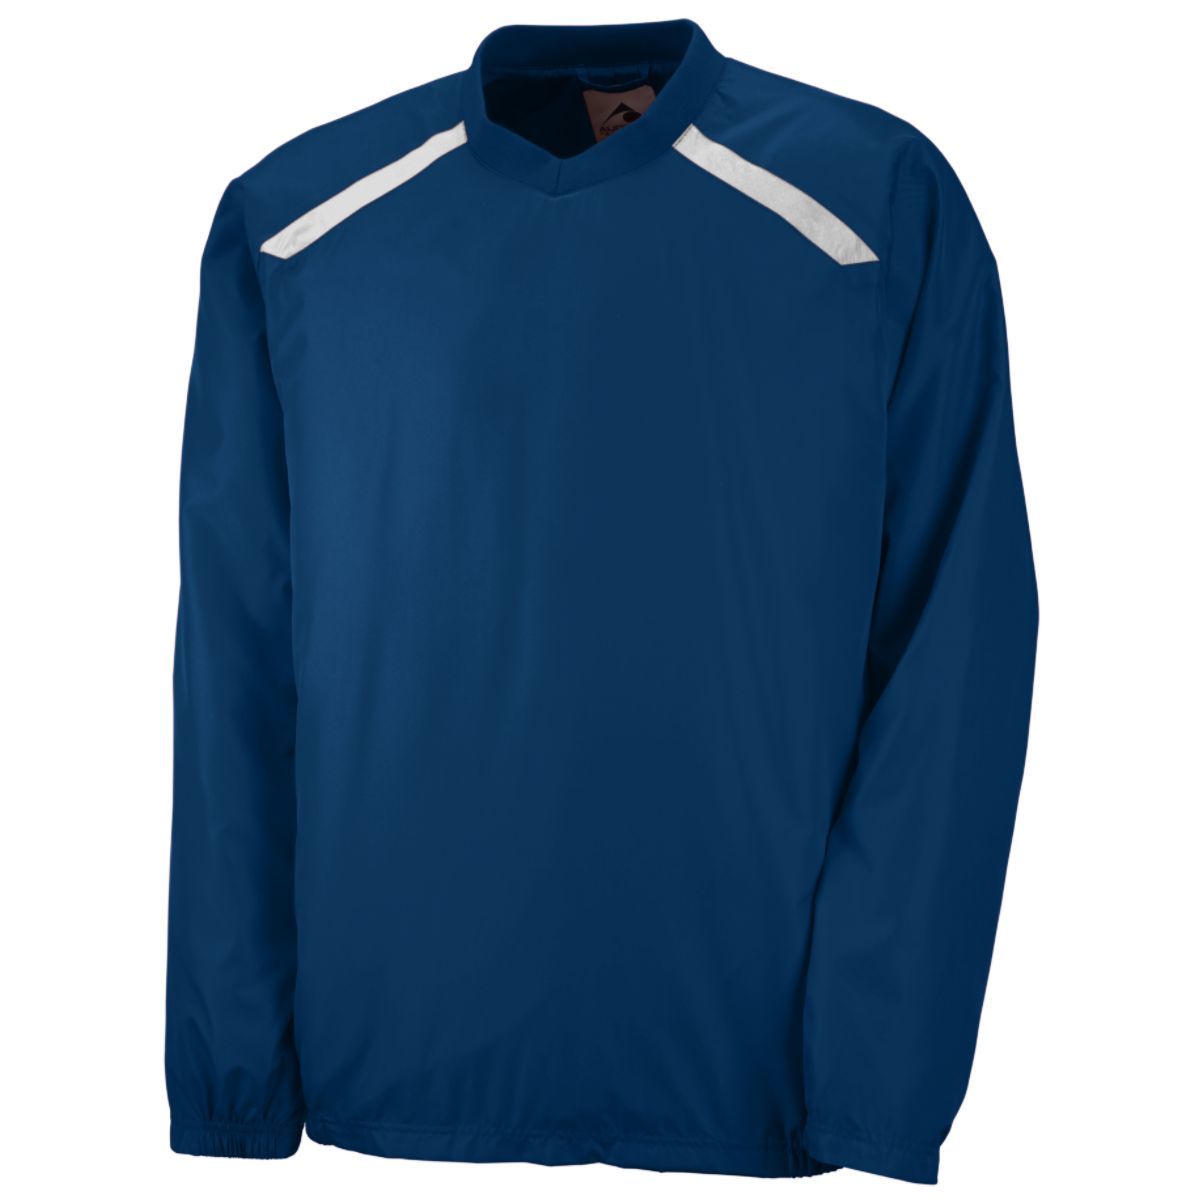 Youth Promentum Pullover 3418